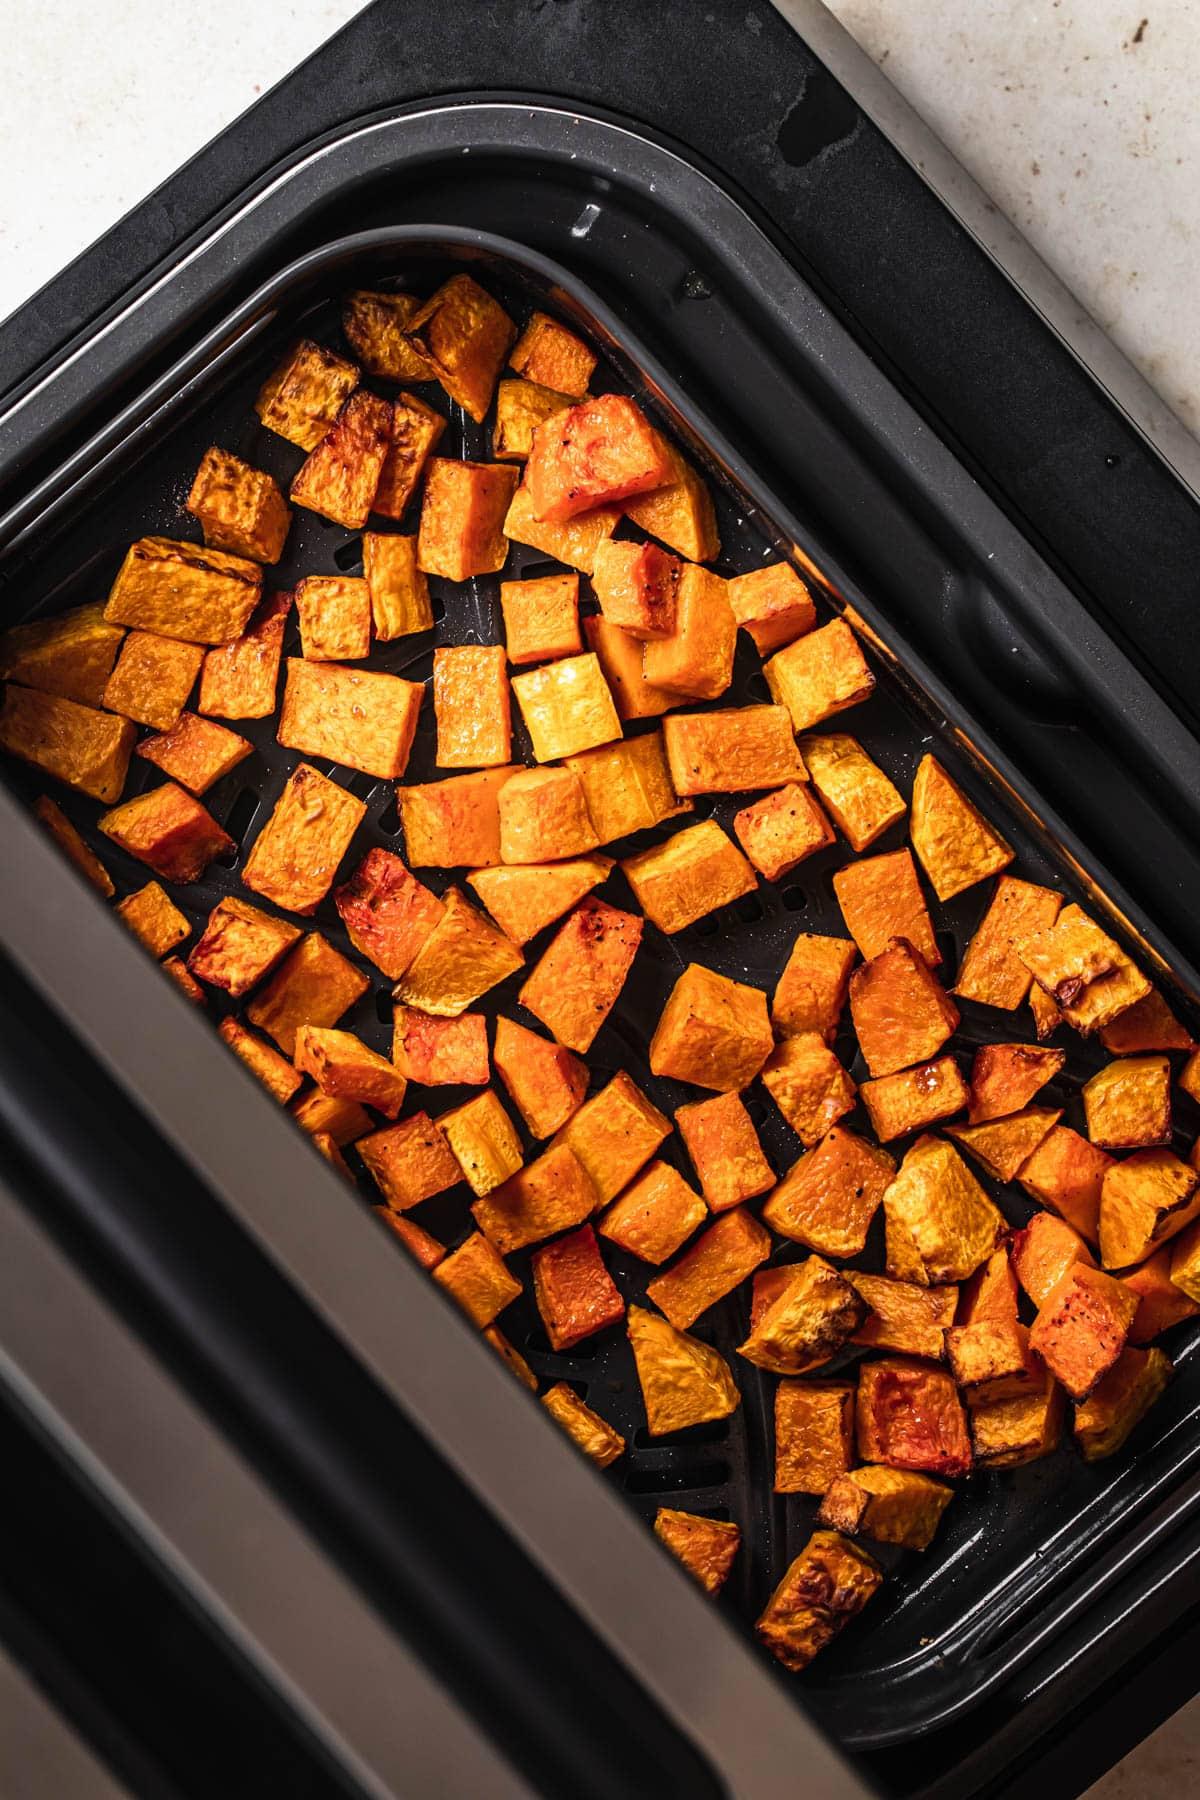 Diced roasted butternut squash in air fryer.